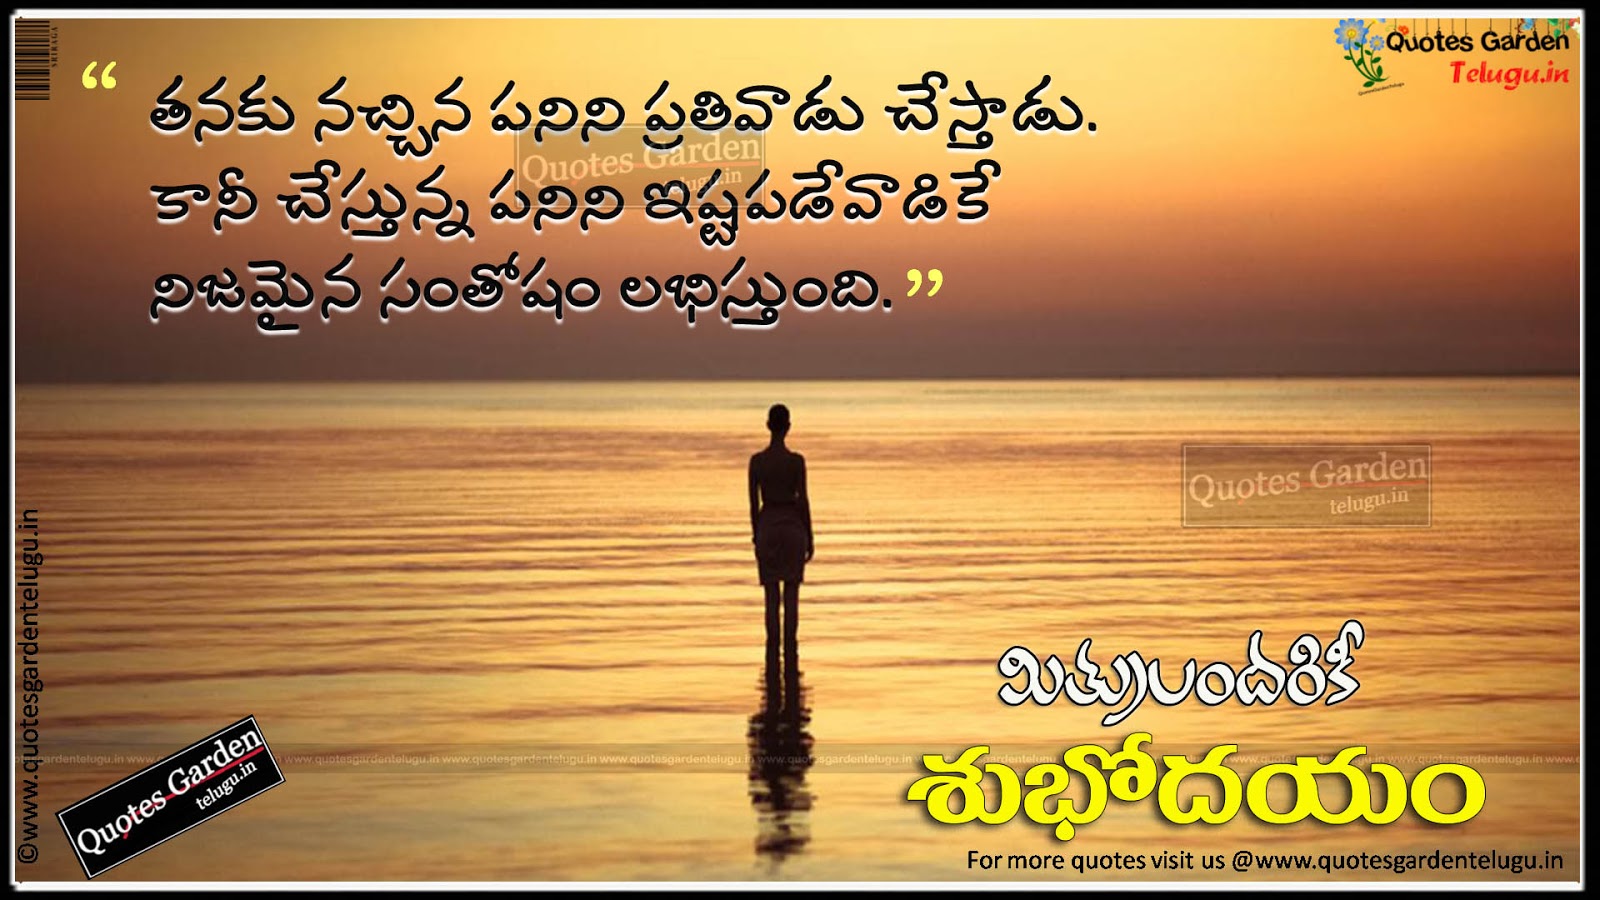 Best telugu good morning images and messages | QUOTES GARDEN ...